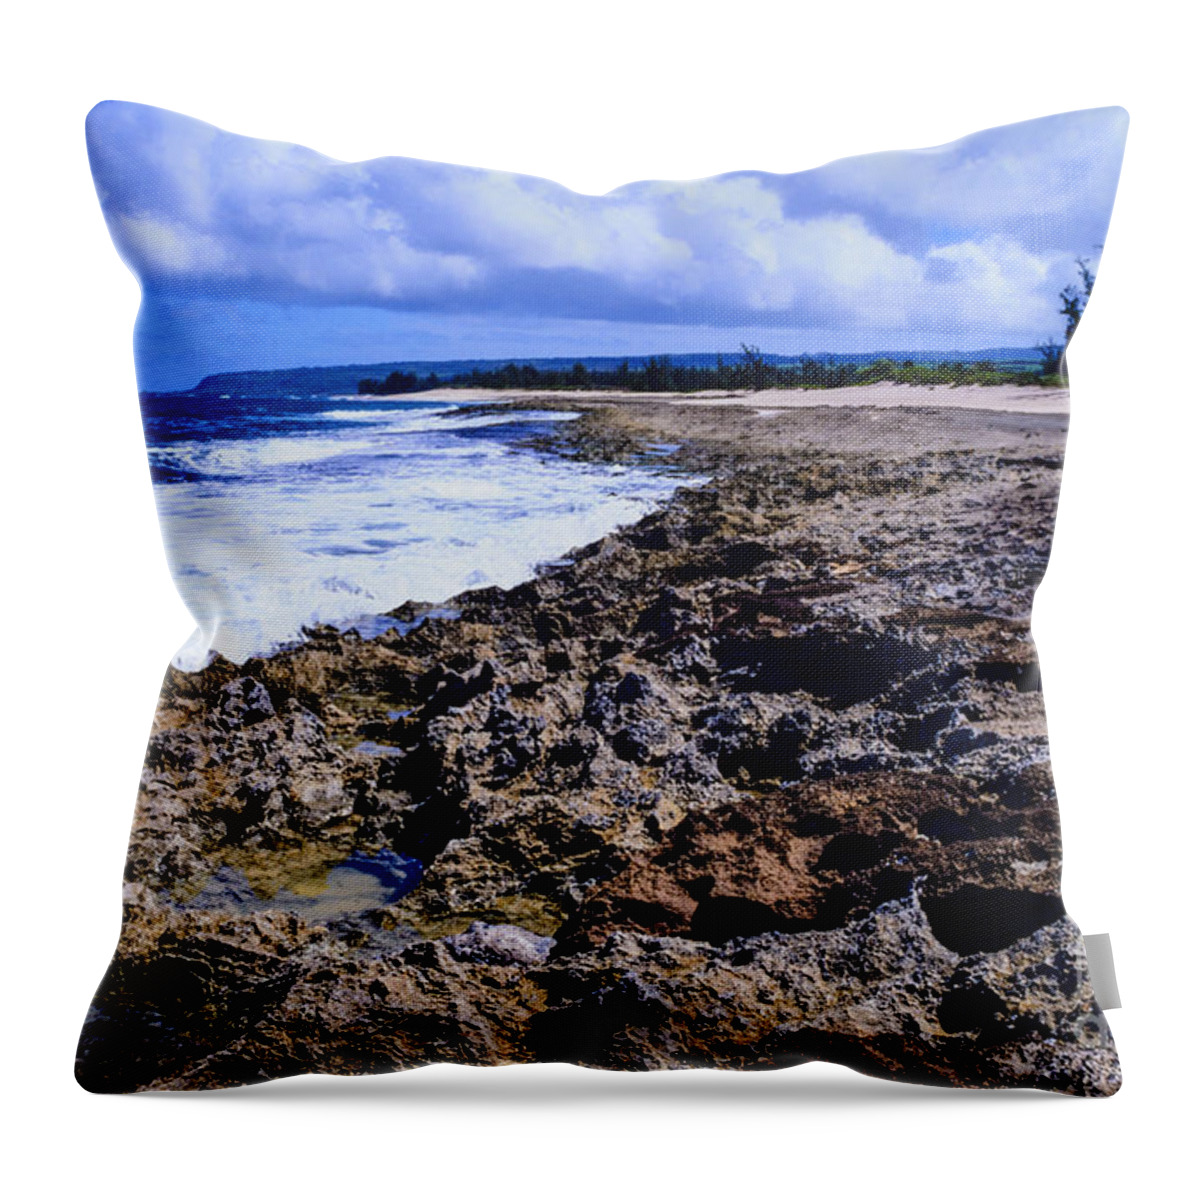 North Shore Throw Pillow featuring the photograph North Shore by Thomas R Fletcher